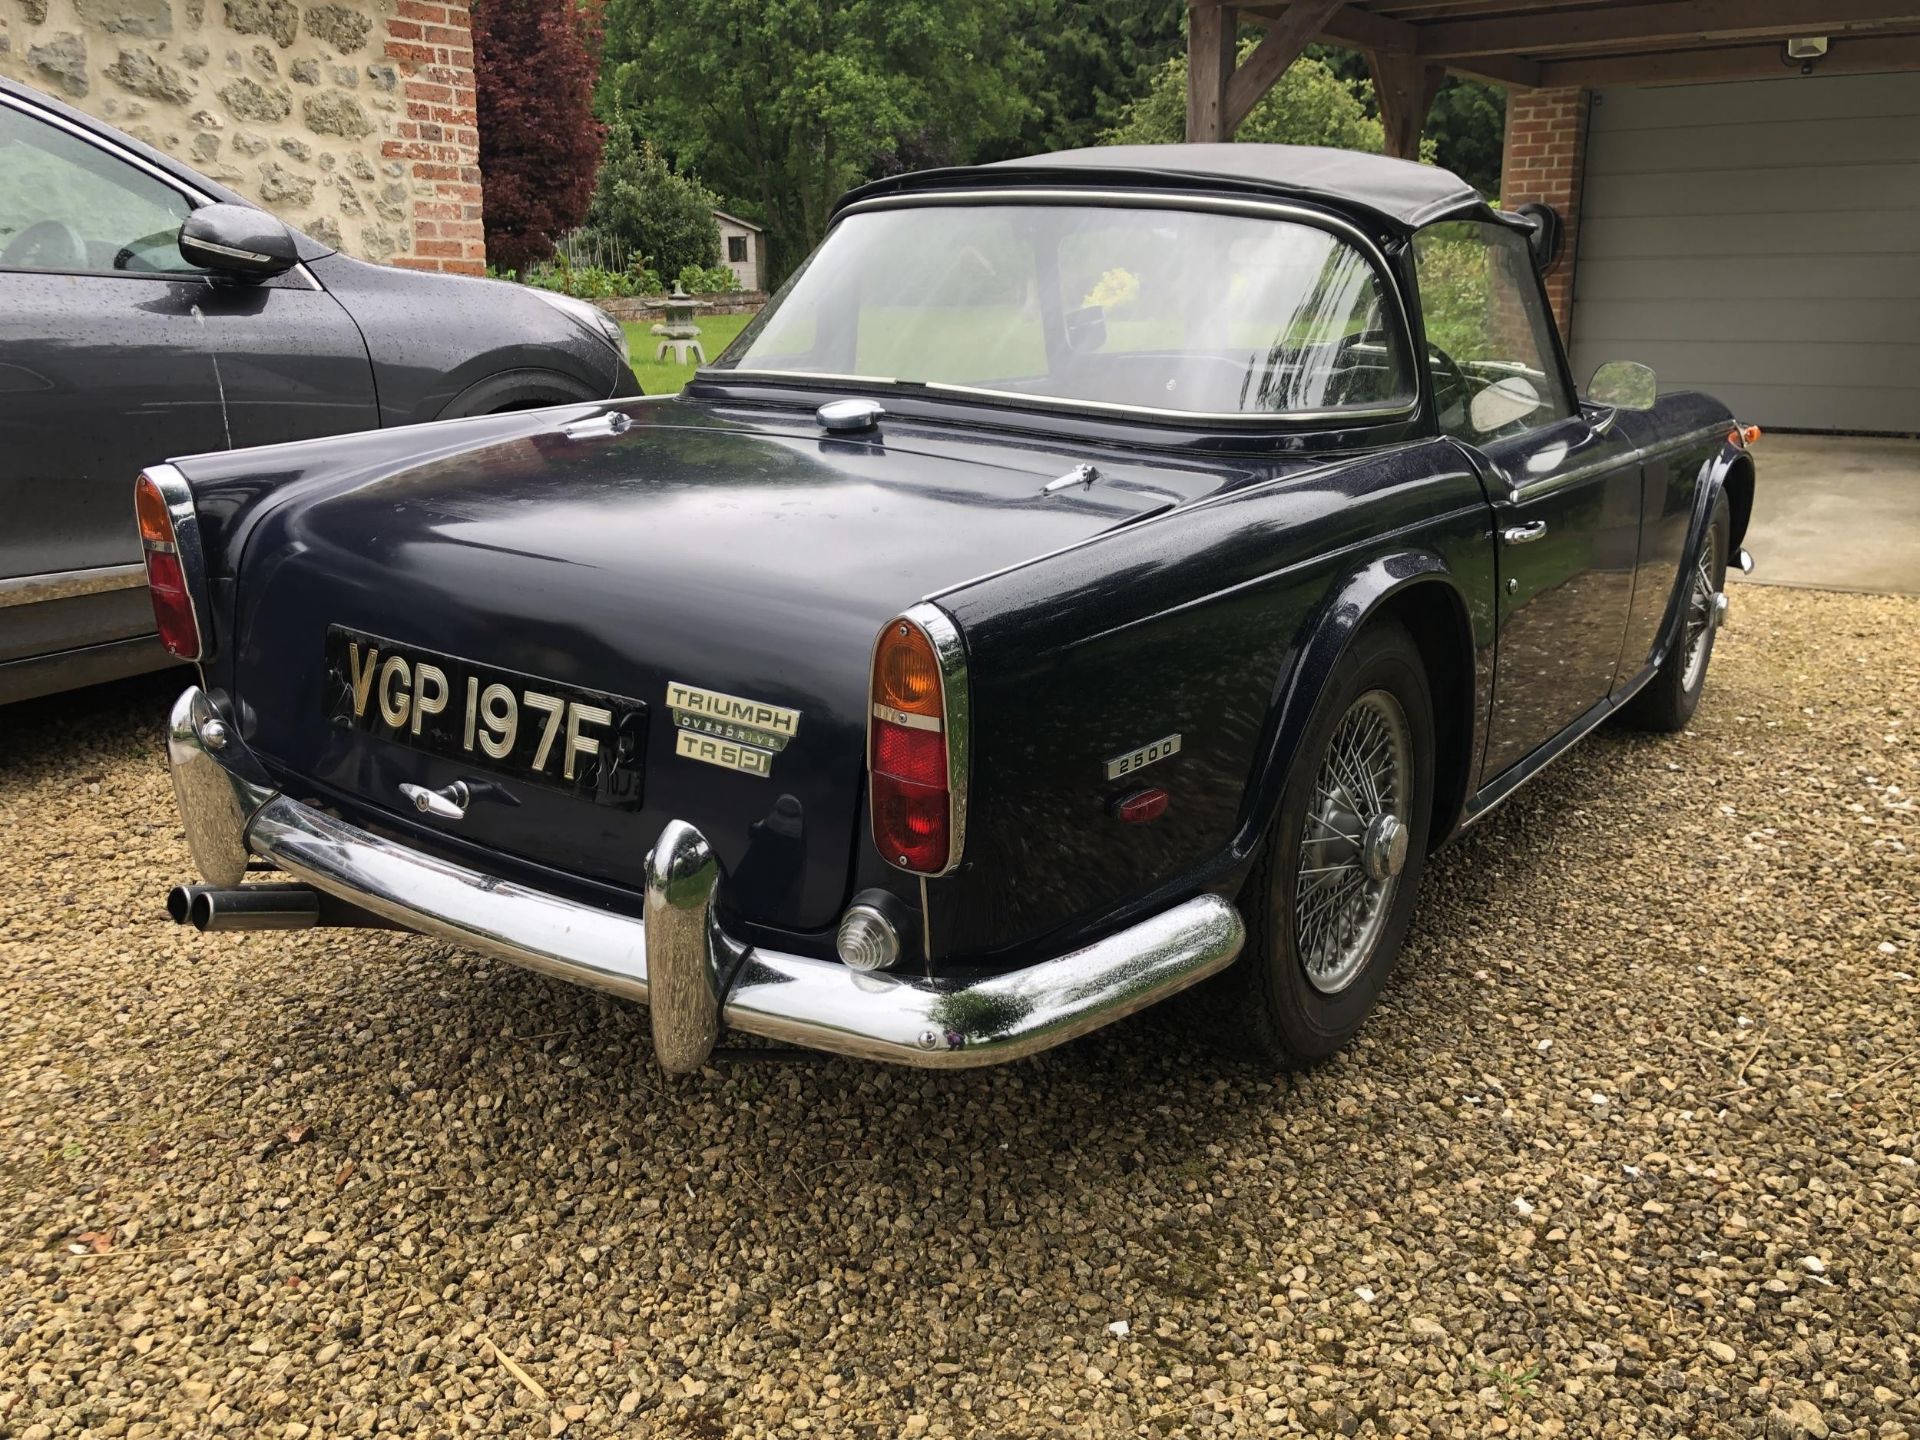 1968 Triumph TR5 PI Registration number VGP 197F Chassis number CP22380 Engine number CP1914E Surrey - Image 7 of 59